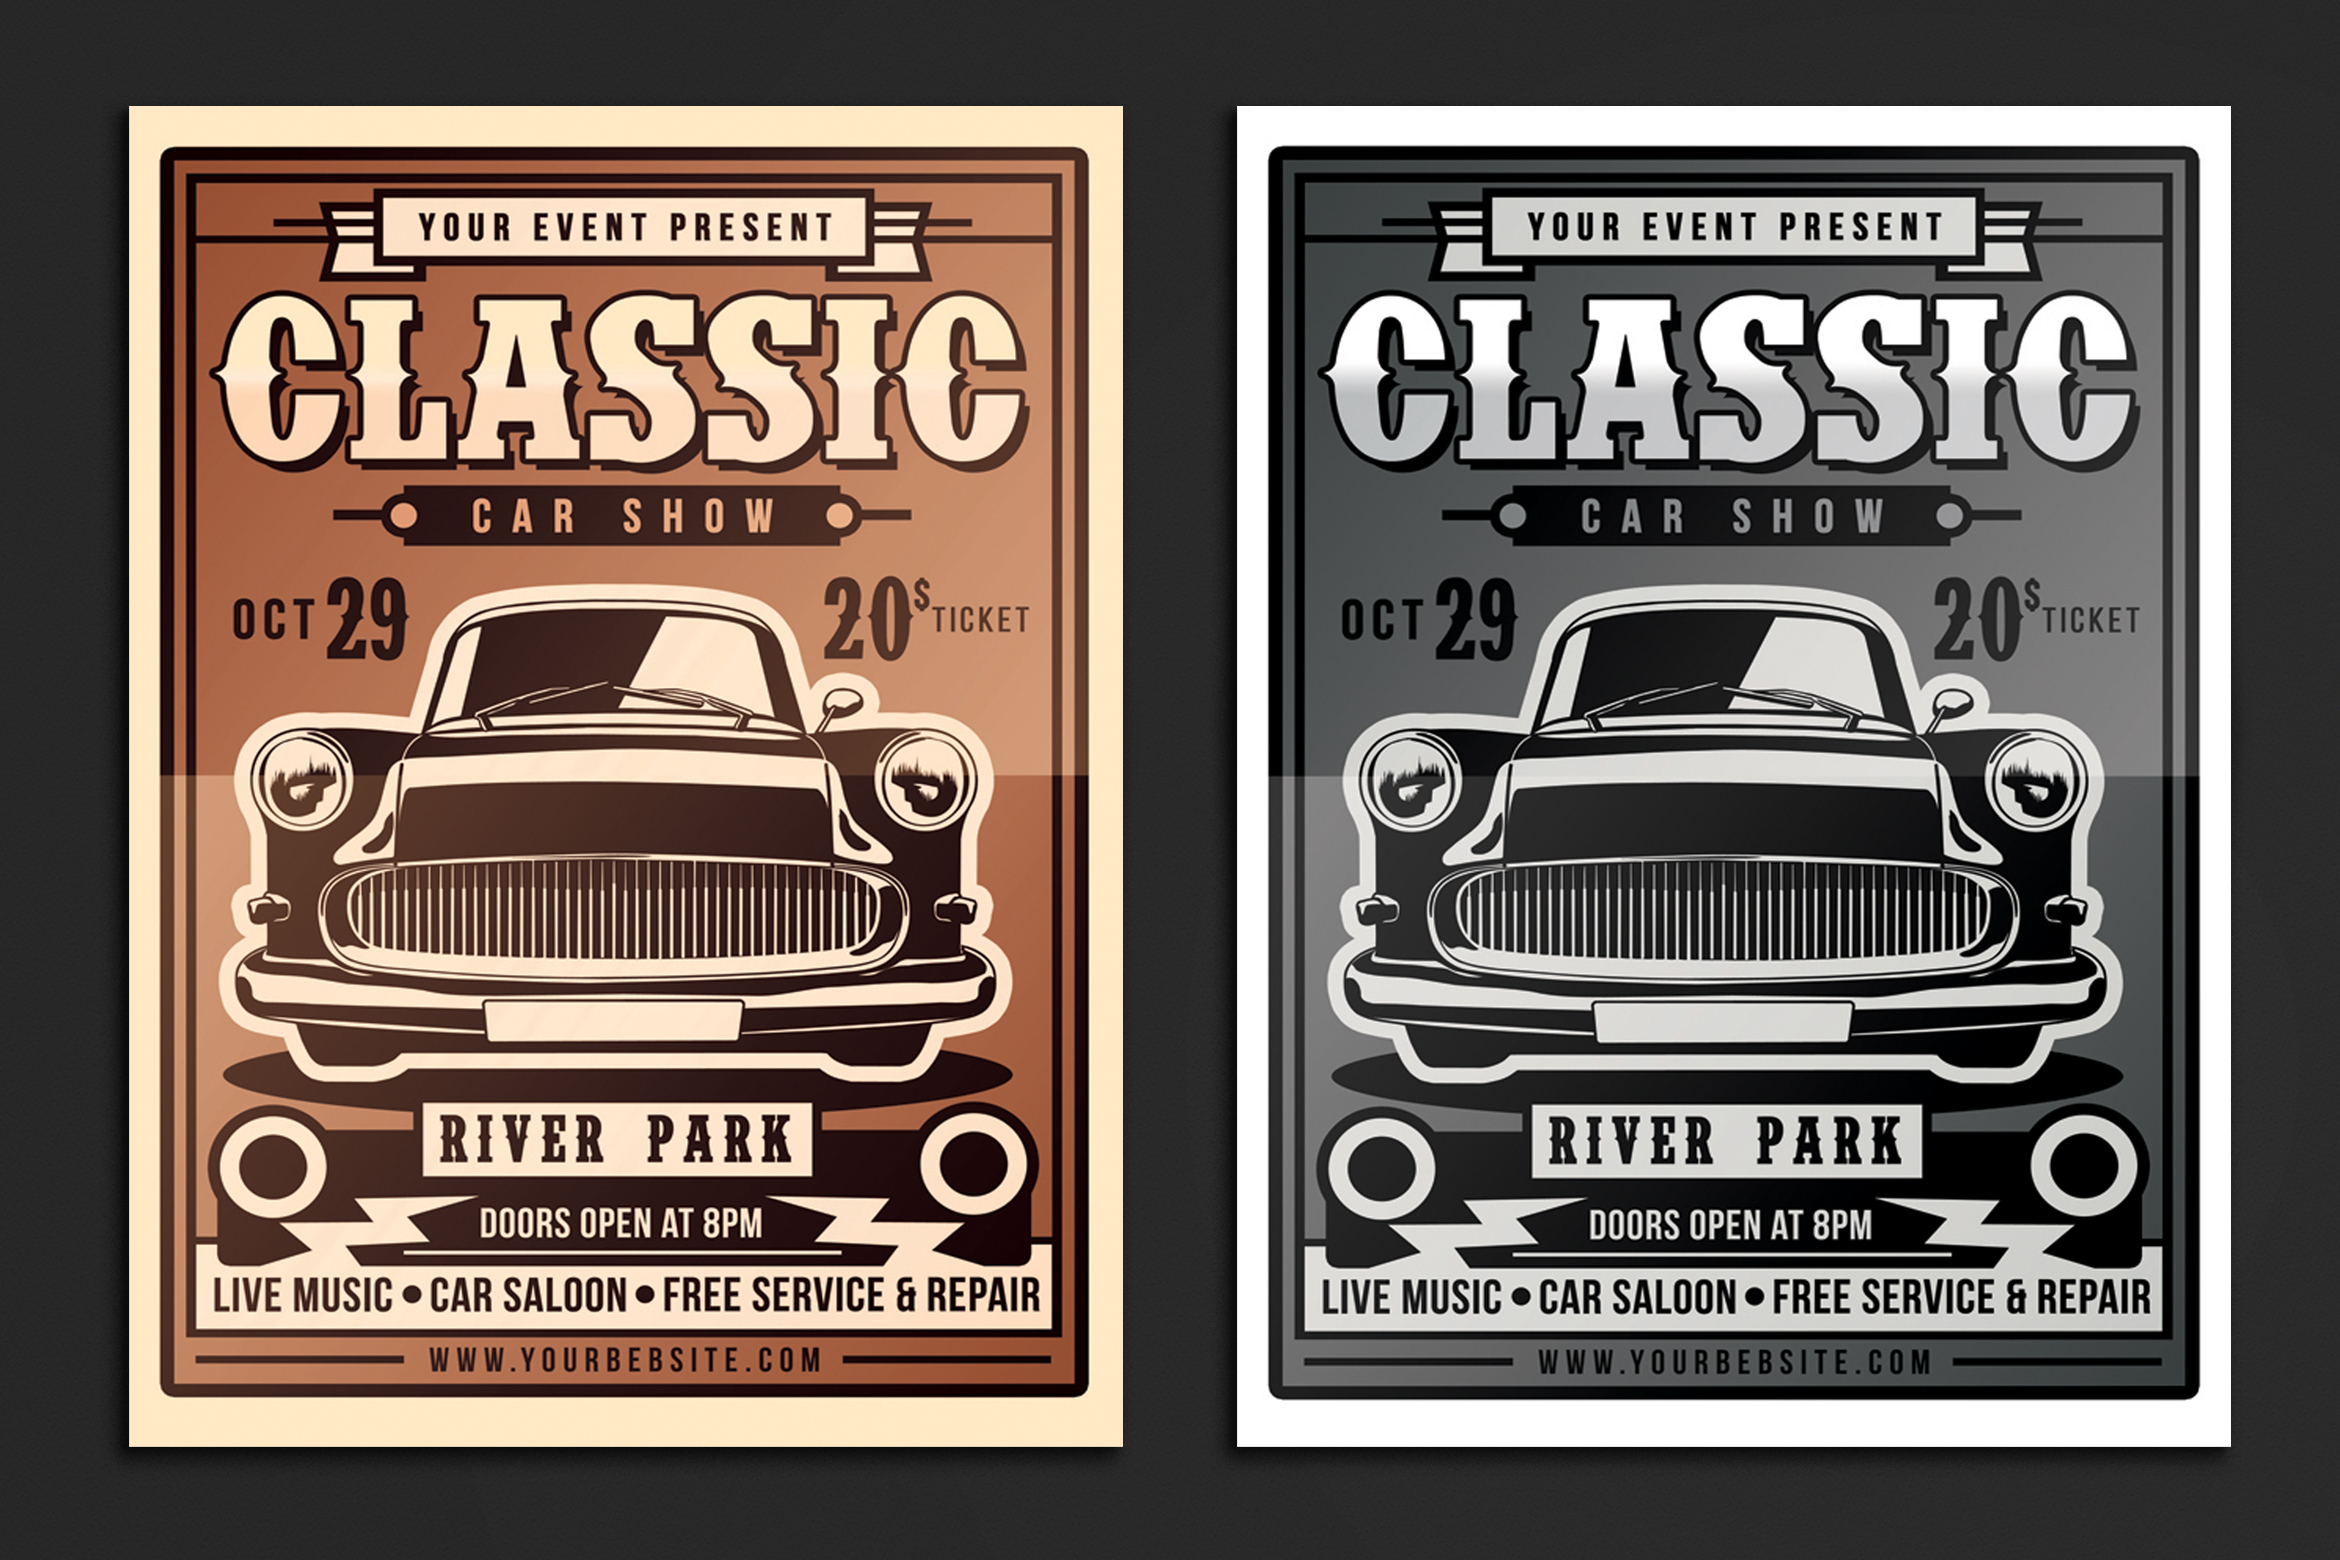 Classic Car Show Flyer For Classic Car Show Flyer Template With Classic Car Show Flyer Template